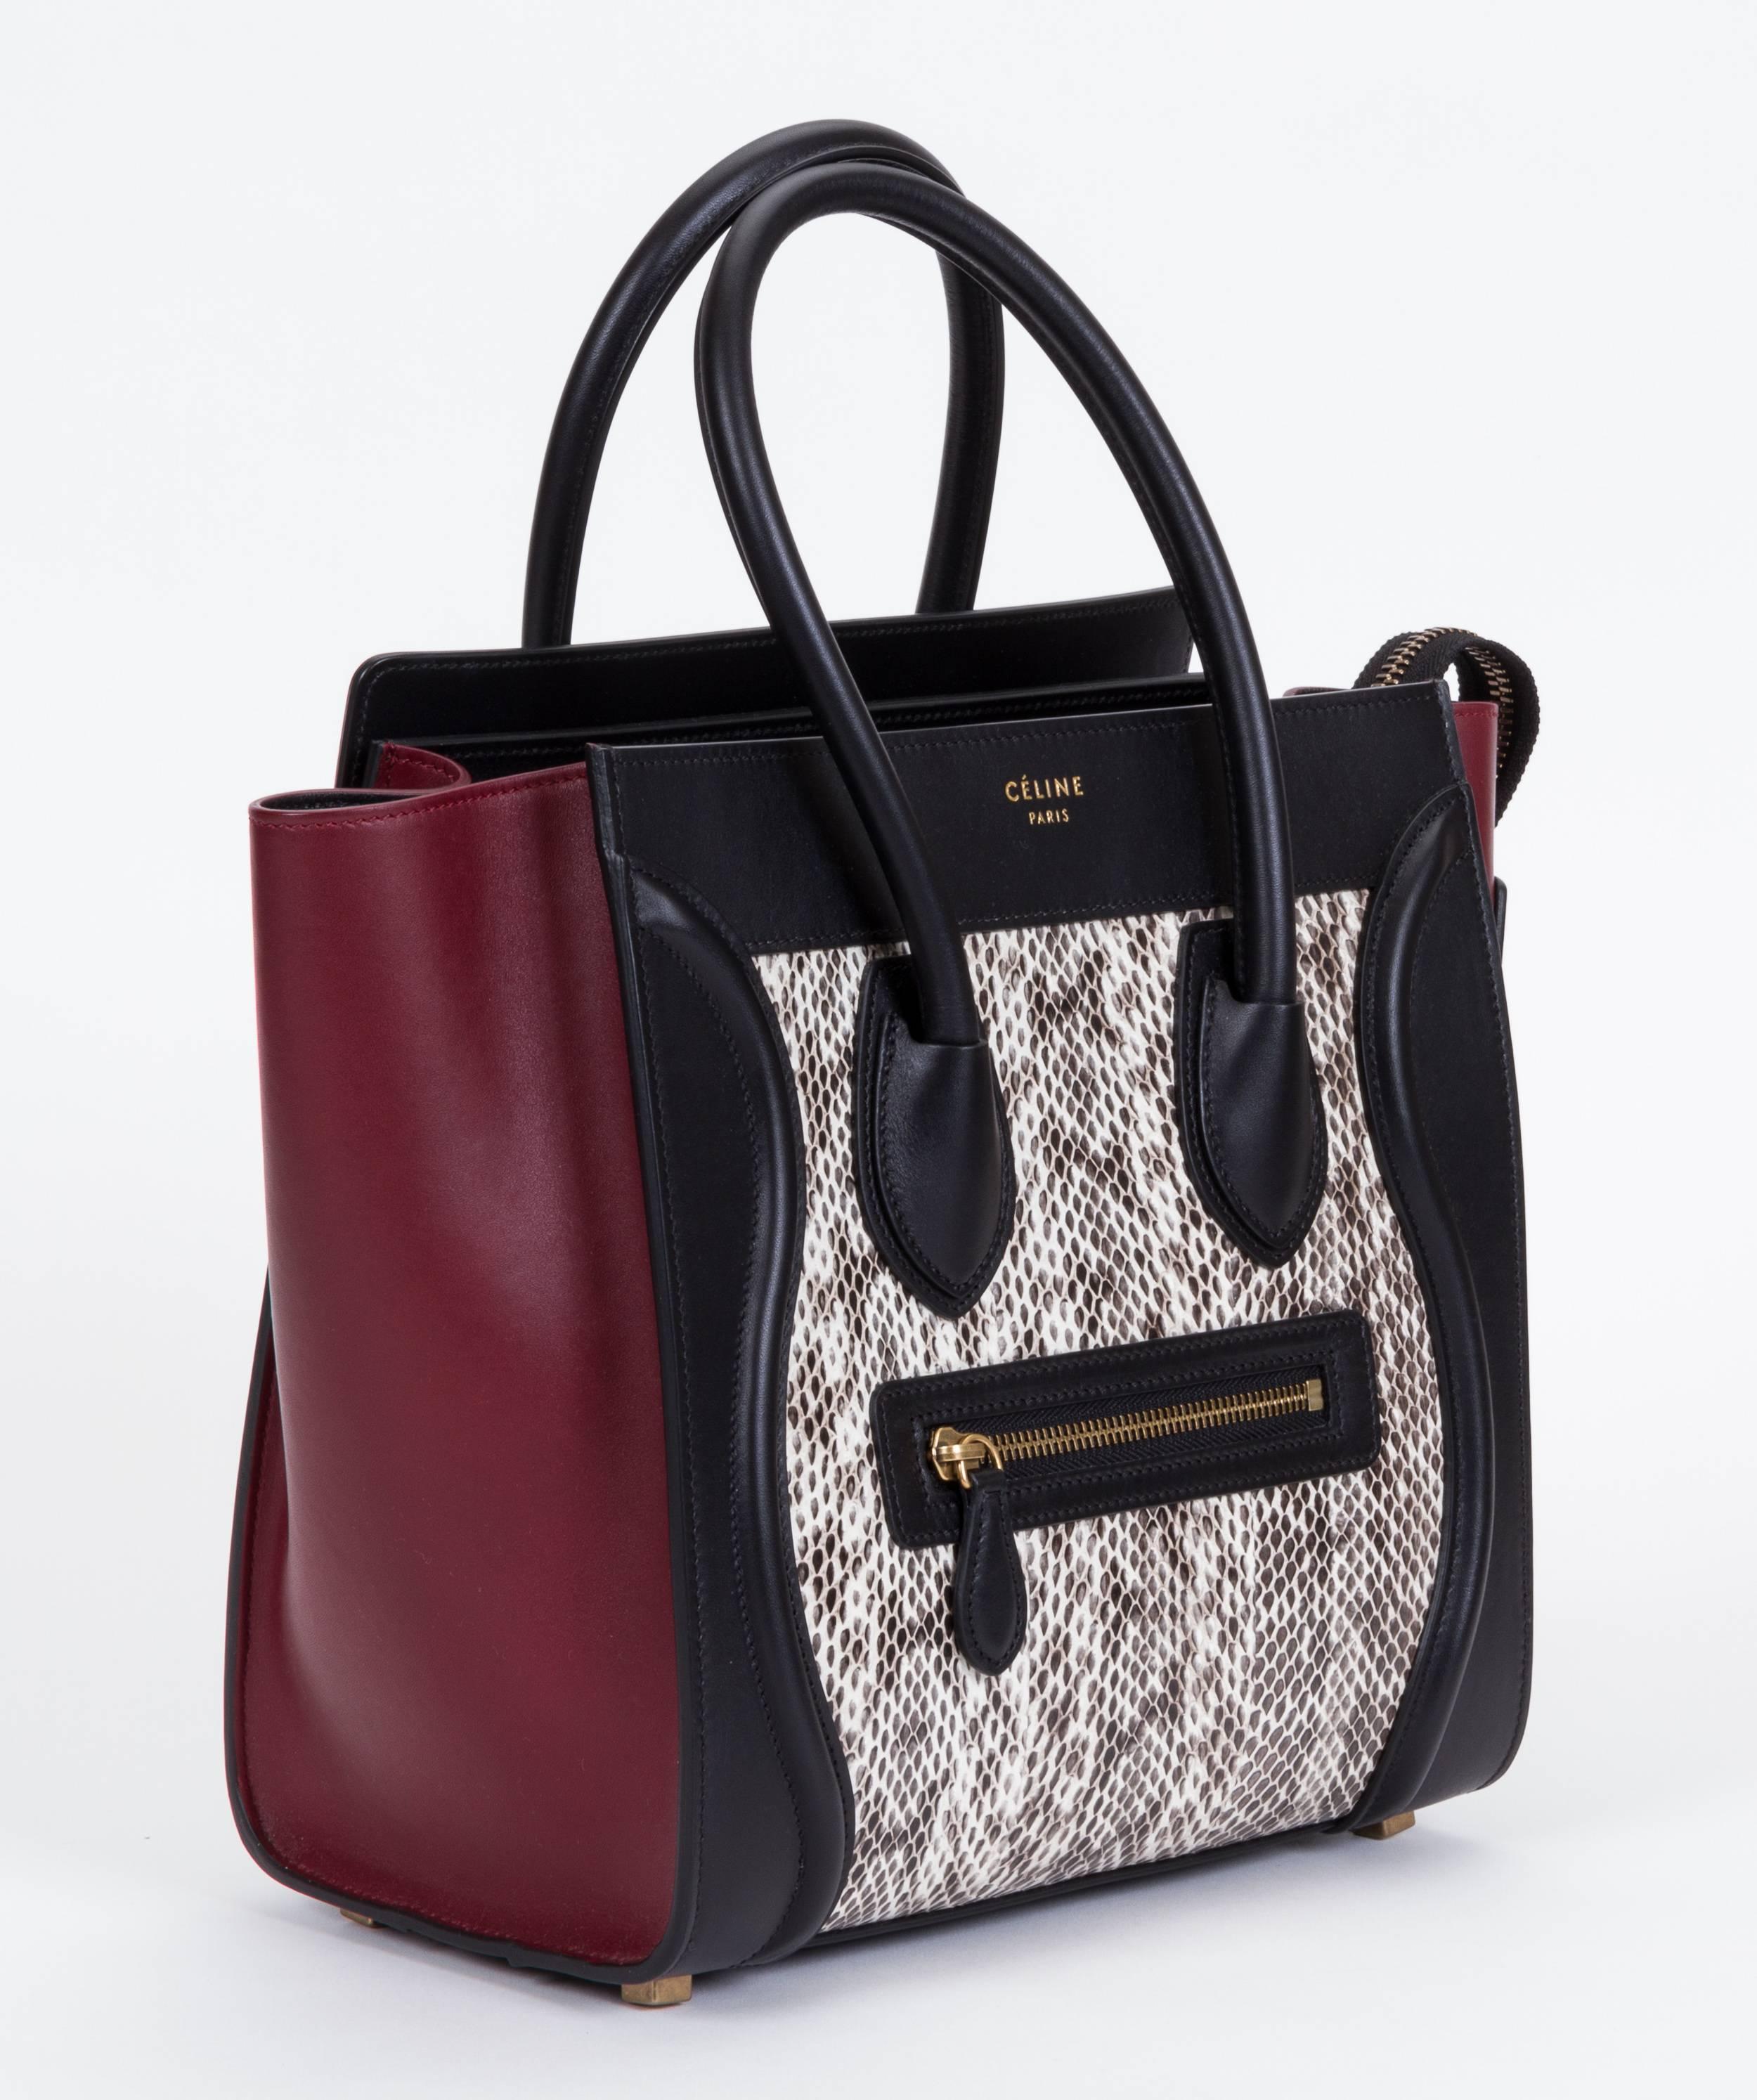 Celine brand new micro luggage handbag in limited edition tricolor water snake leather. Burgundy . black and white combinations. Zipper closer and outer zipped pocket, inner zipped pocket and double flat pockets. Comes with original tag and dust